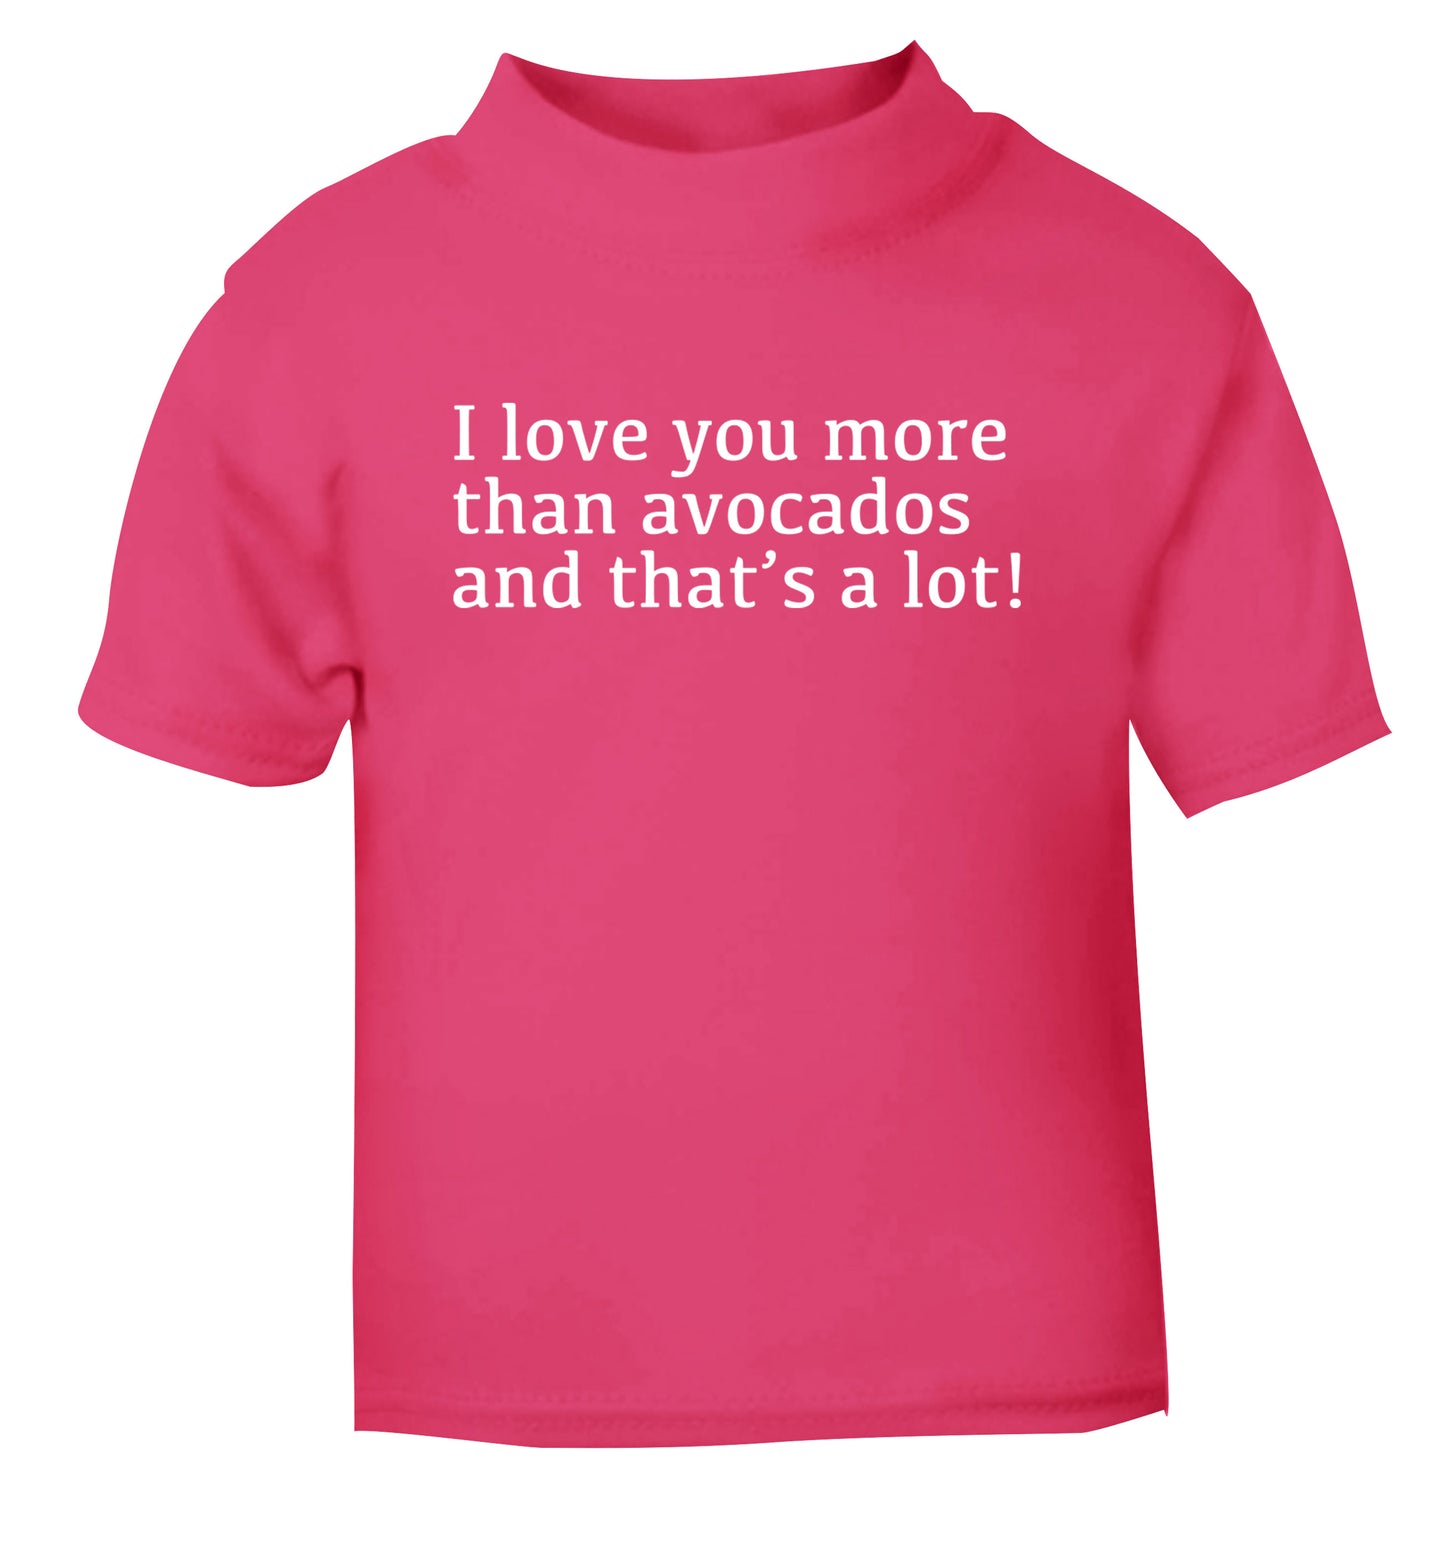 I love you more than avocados and that's a lot pink Baby Toddler Tshirt 2 Years